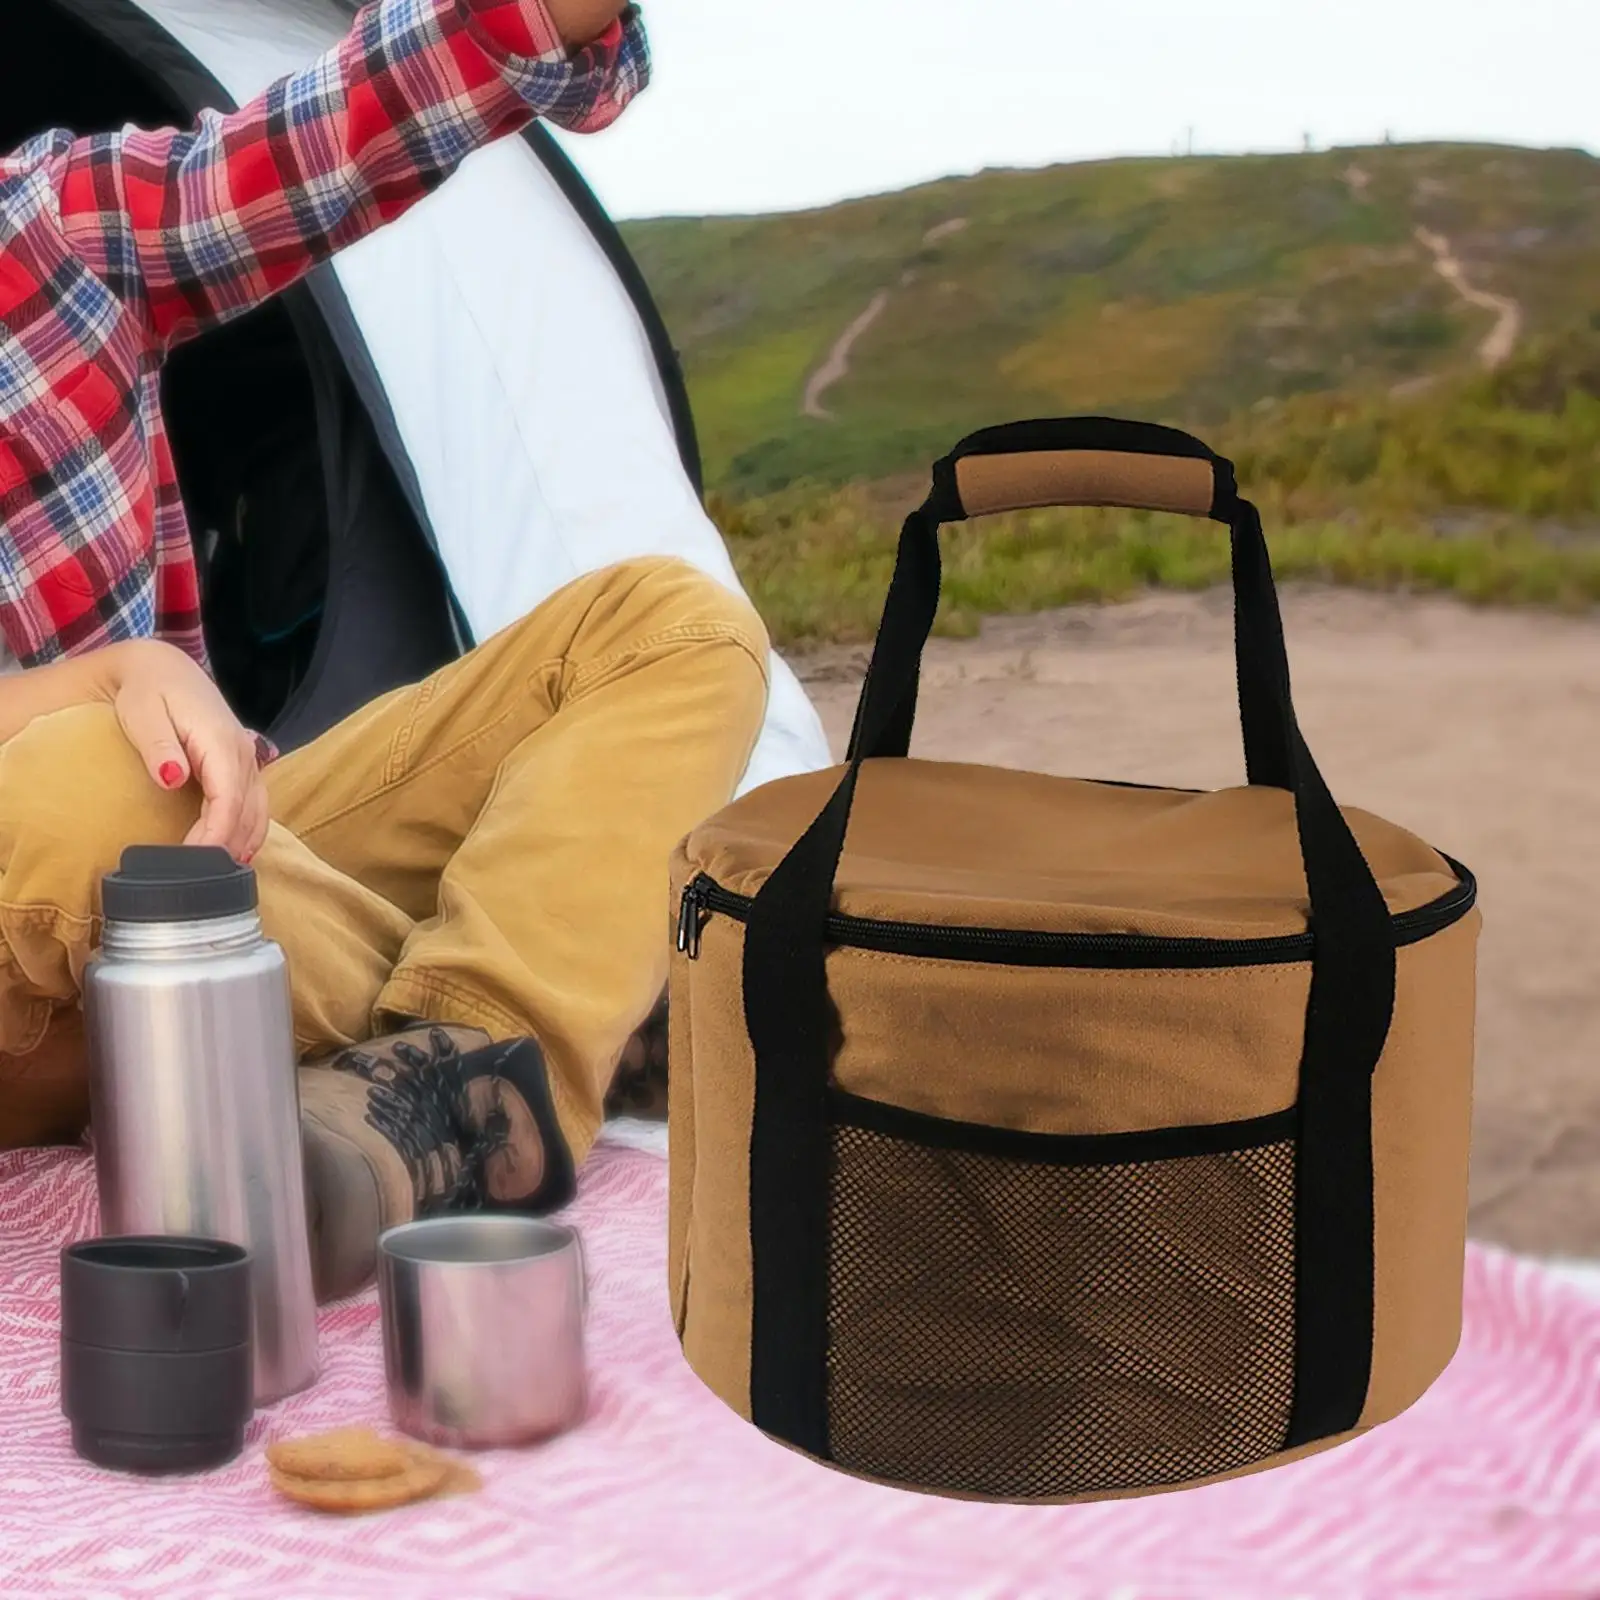 Camping Cookware Storage Bags Backpacking Cooking Utensils Organizer Travel Bag Portable Pouch   Barbecue Party Picnic